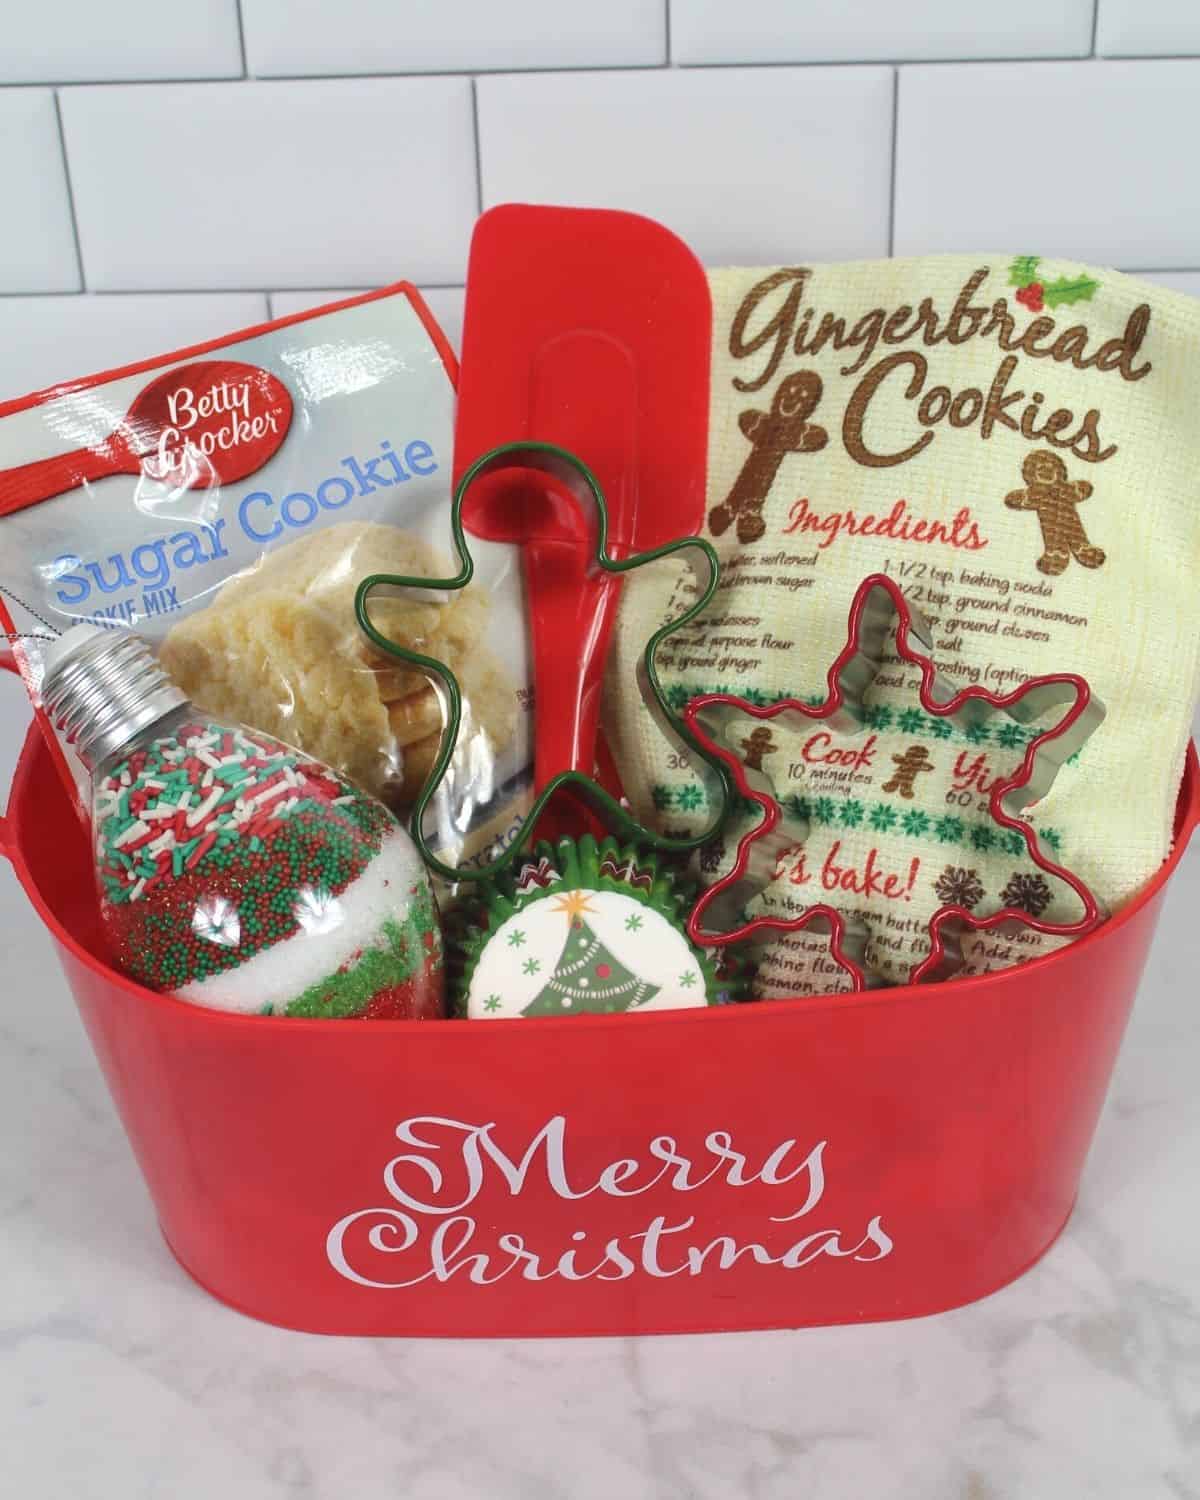 Dollar Tree holiday gift basket filled with baking essentials like Christmas cookie cutters, kitchen towel, clear ornament with sprinkles, Betty Crock sugar cookie mix, cupcake wrappers with Christmas trees on them and a red spatula all in red plastic gift basket that says "Merry Christmas" on a light grey marble background and subway tile backsplash